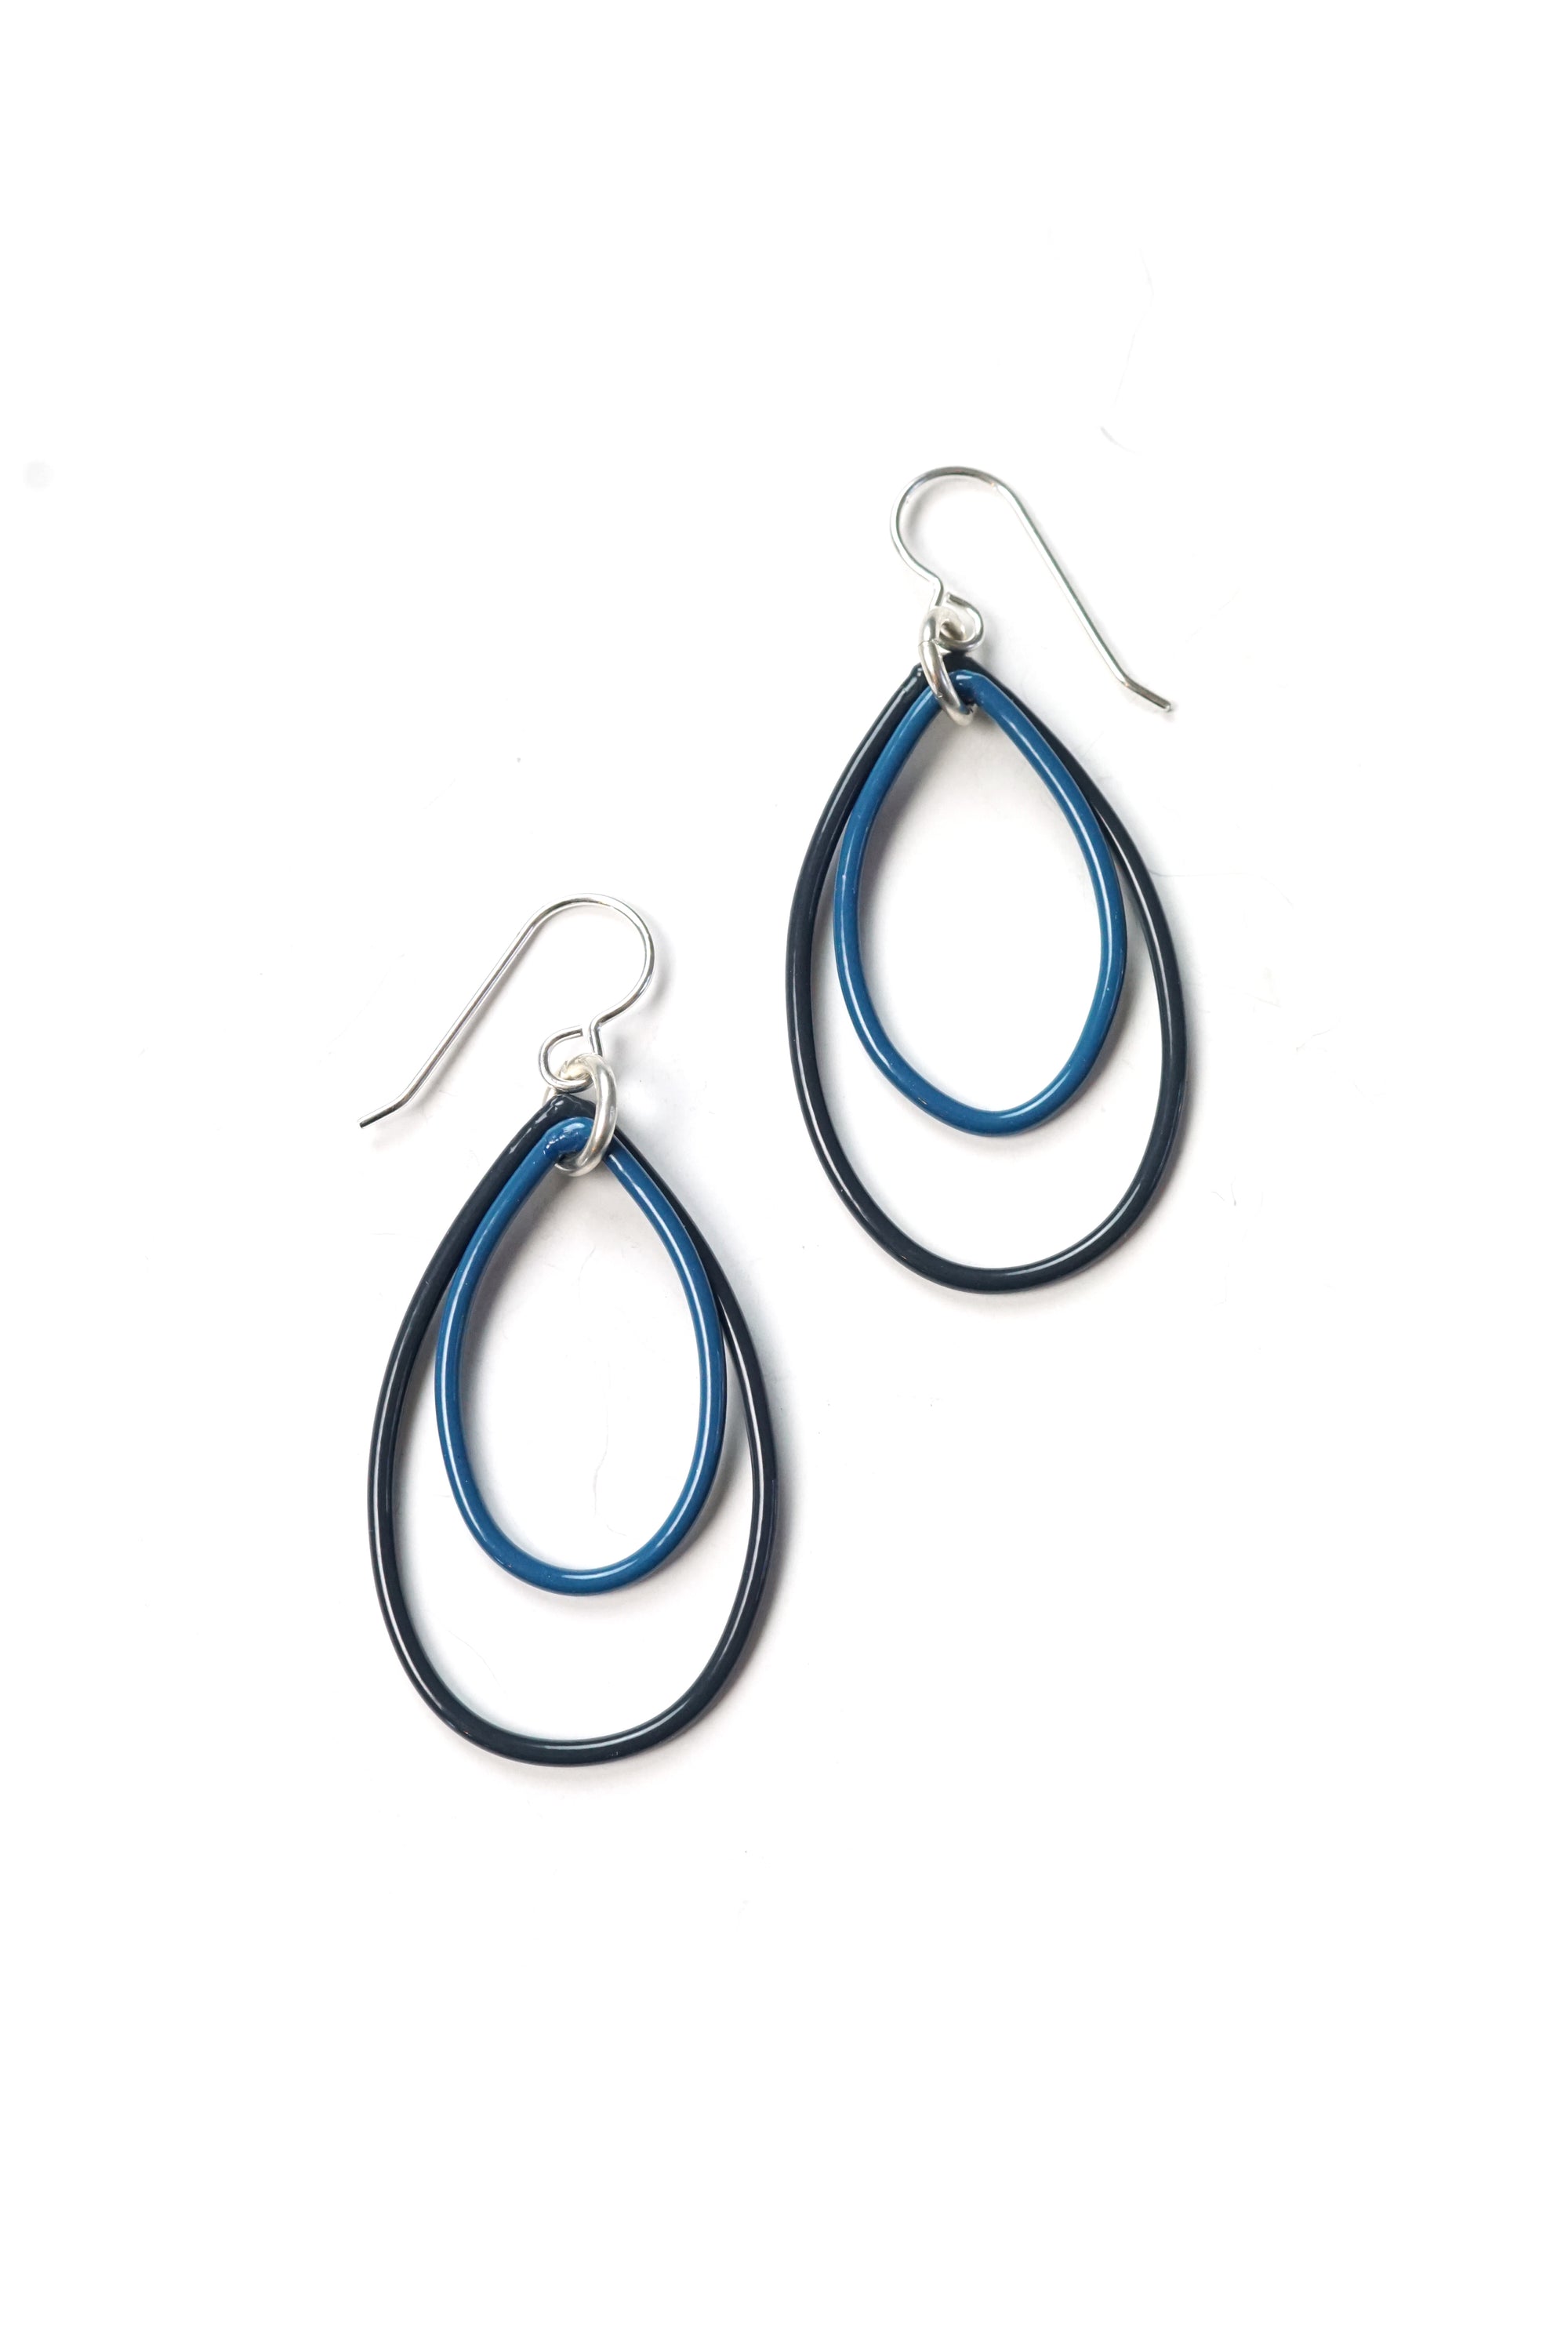 Nellie earrings in Midnight Grey and Azure Blue